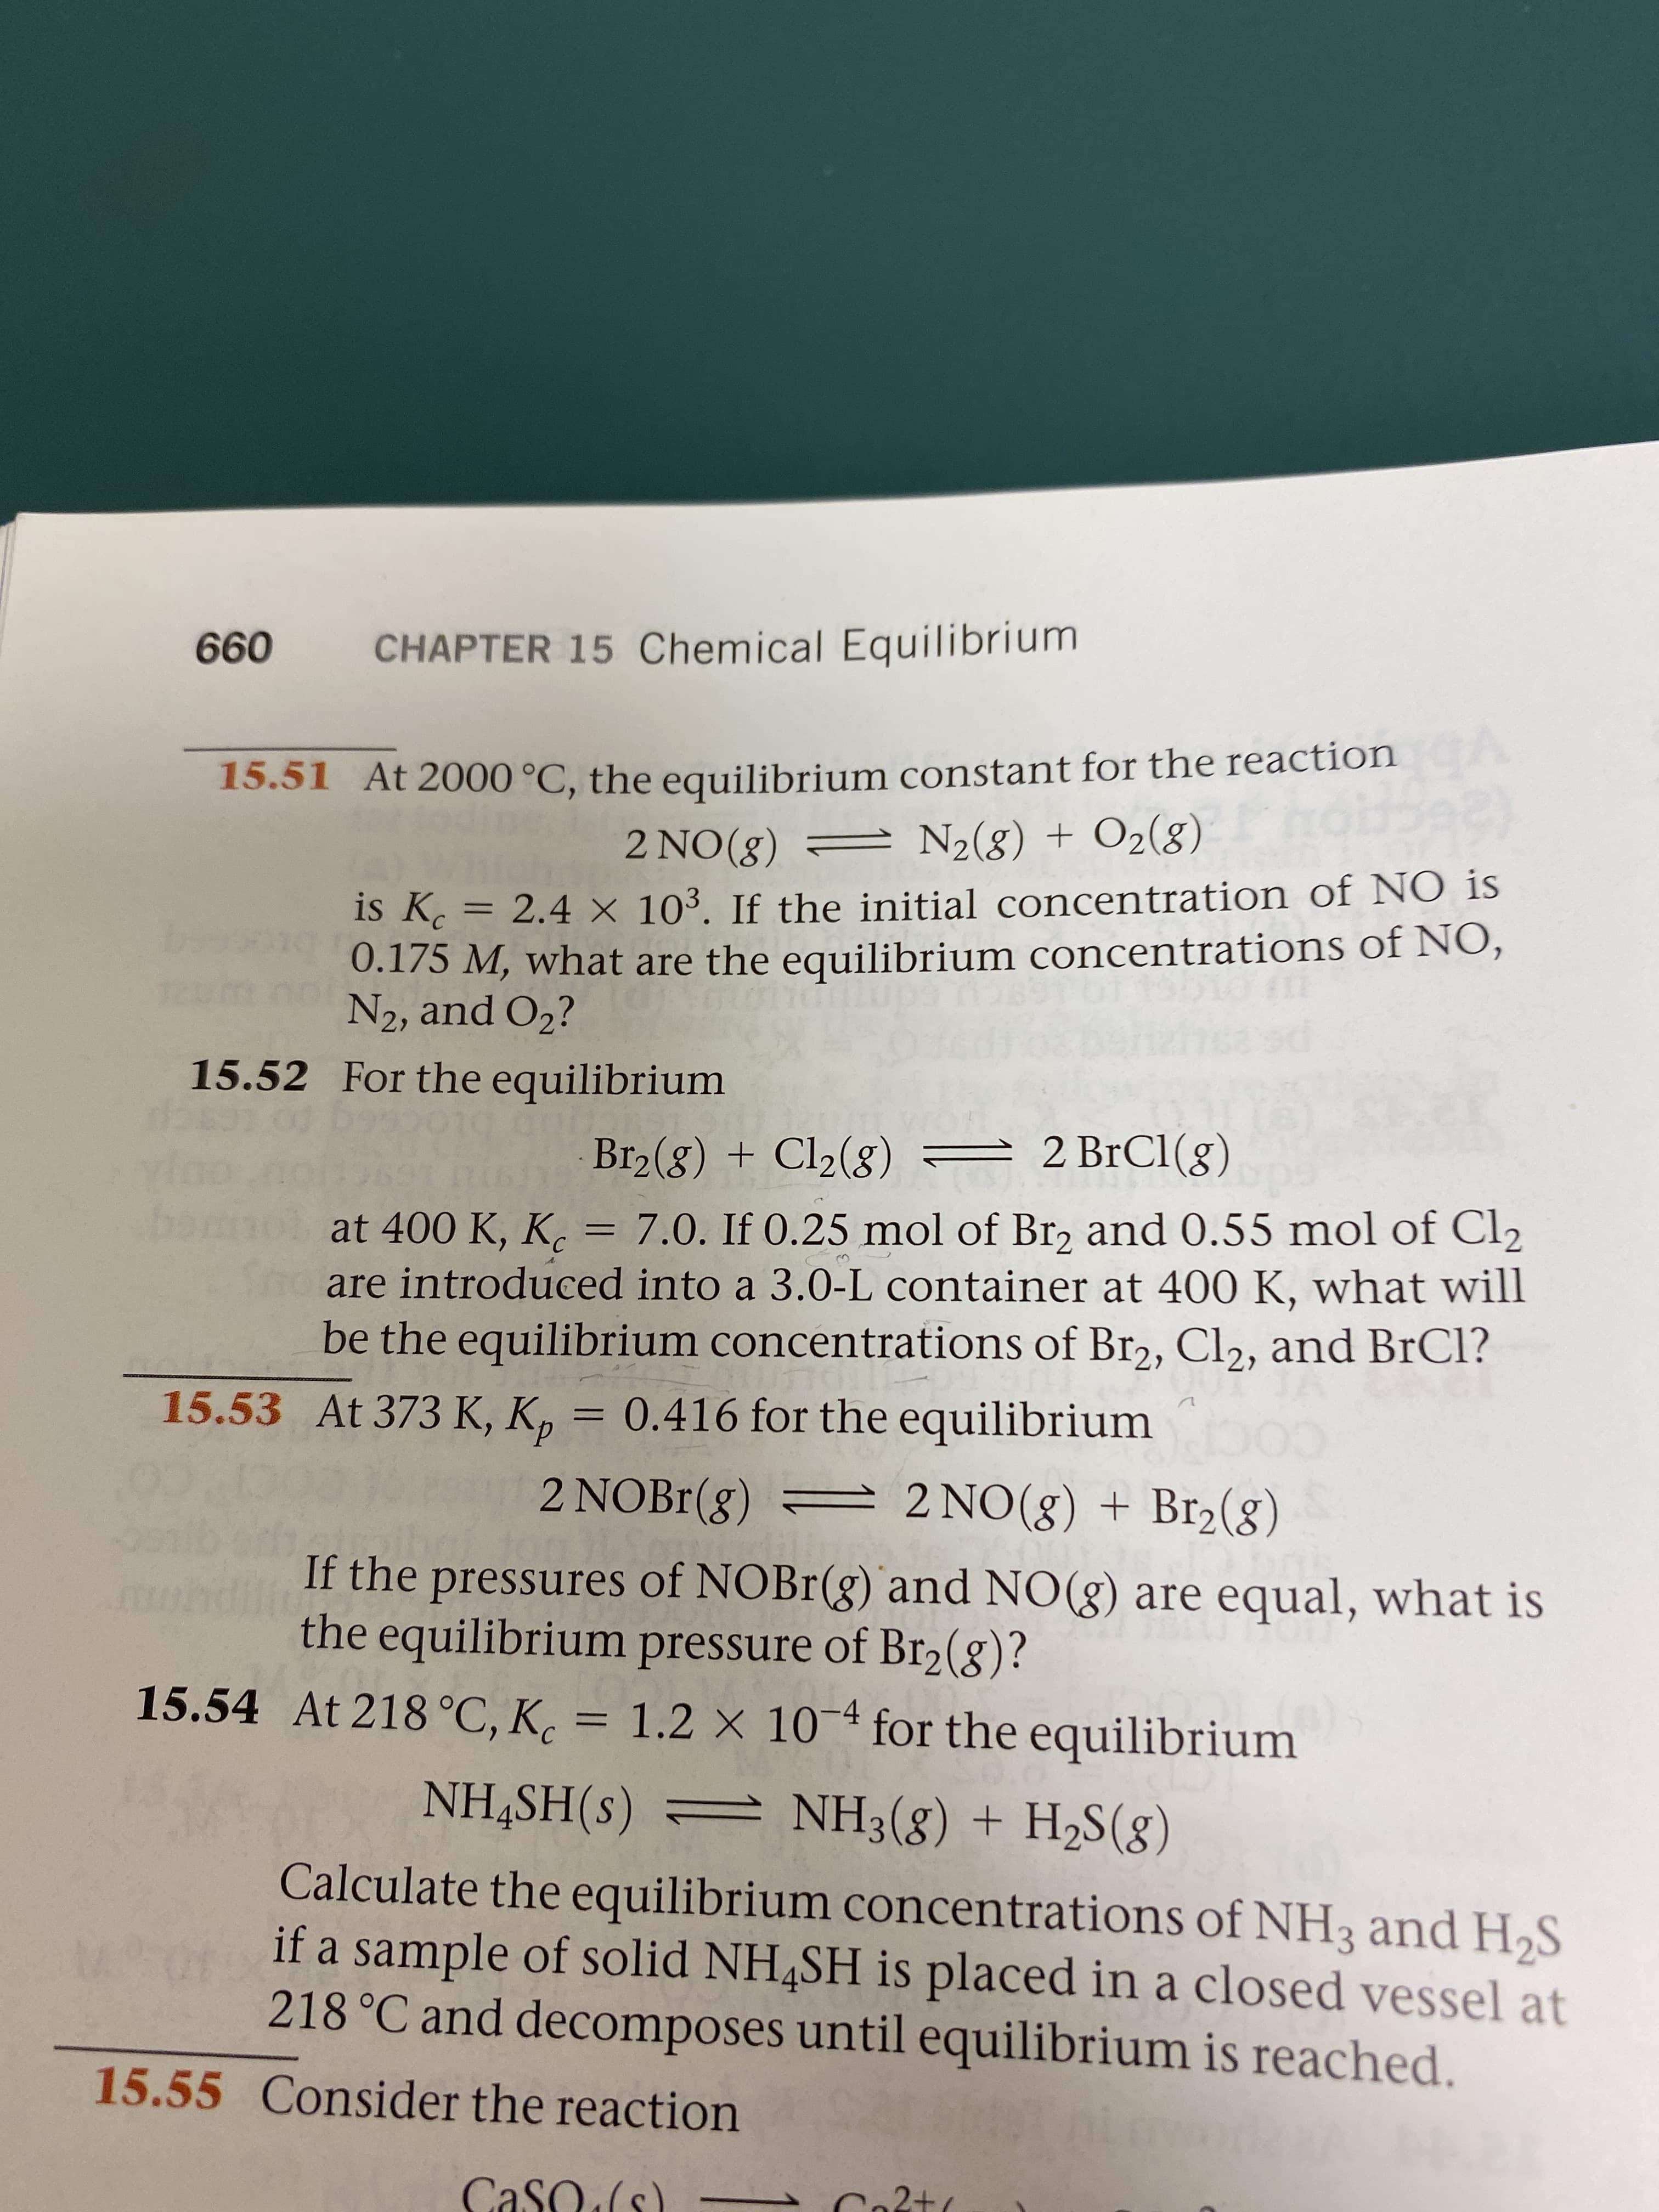 660
CHAPTER 15 Chemical Equilibrium
15.51 At 2000 °C, the equilibrium constant for the reaction
2 NO(8) = N2(g) + O2(g)
is Kc
0.175 M, what are the equilibrium concentrations of NO,
N2, and O2?
2.4 X 103. If the initial concentration of NO is
%3D
15.52 For the equilibrium
– 2
Br2(g) + Cl2(g) = 2 BrCI(g)
at 400 K, K. = 7.0. If 0.25 mol of Br, and 0.55 mol of Cl2
are introduced into a 3.0-L container at 400 K, what will
be the equilibrium concentrations of Br2, Cl2, and BrCl?
%3D
15.53 At 373 K, Kp
0.416 for the equilibrium
2 NOB1(g) = 2 NO(g) + Br2(g)
If the pressures of NOBr(g) and NO(g) are equal, what is
the equilibrium pressure of Br2(8)?
15.54 At 218 °C, K. = 1.2 × 10-ª for the equilibrium
NH,SH(s) = NH3(8) + H2S(8)
Calculate the equilibrium concentrations of NH3 and H,S
if a sample of solid NH,SH is placed in a closed vessel at
218 °C and decomposes until equilibrium is reached.
15.55 Consider the reaction
CaSO (s)
Co2t
n2+
